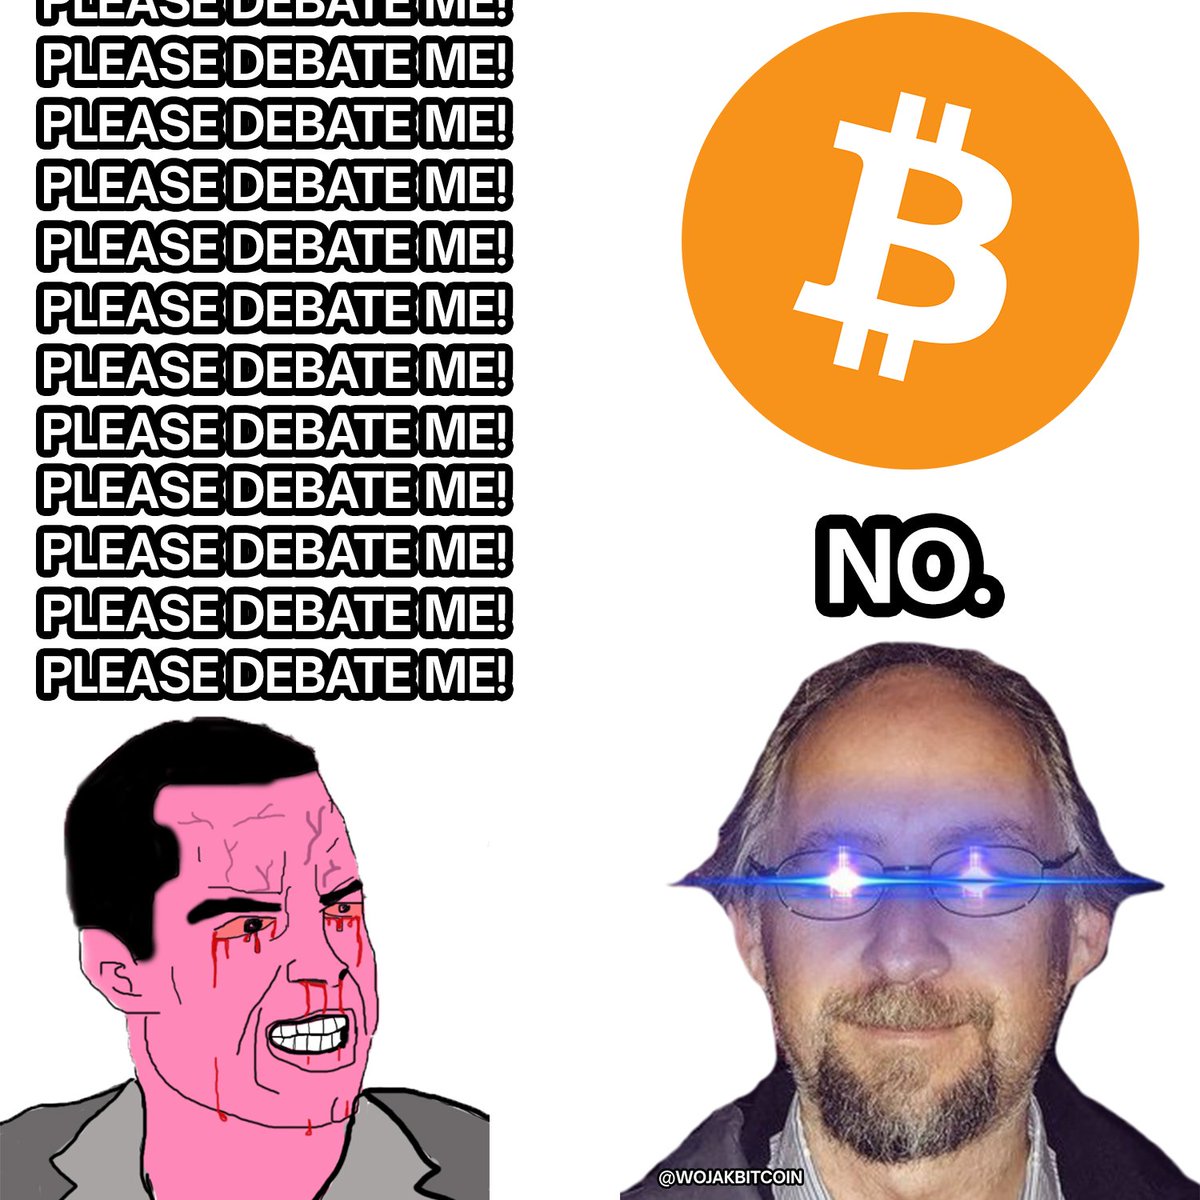 Thoughts on Roger Ver?